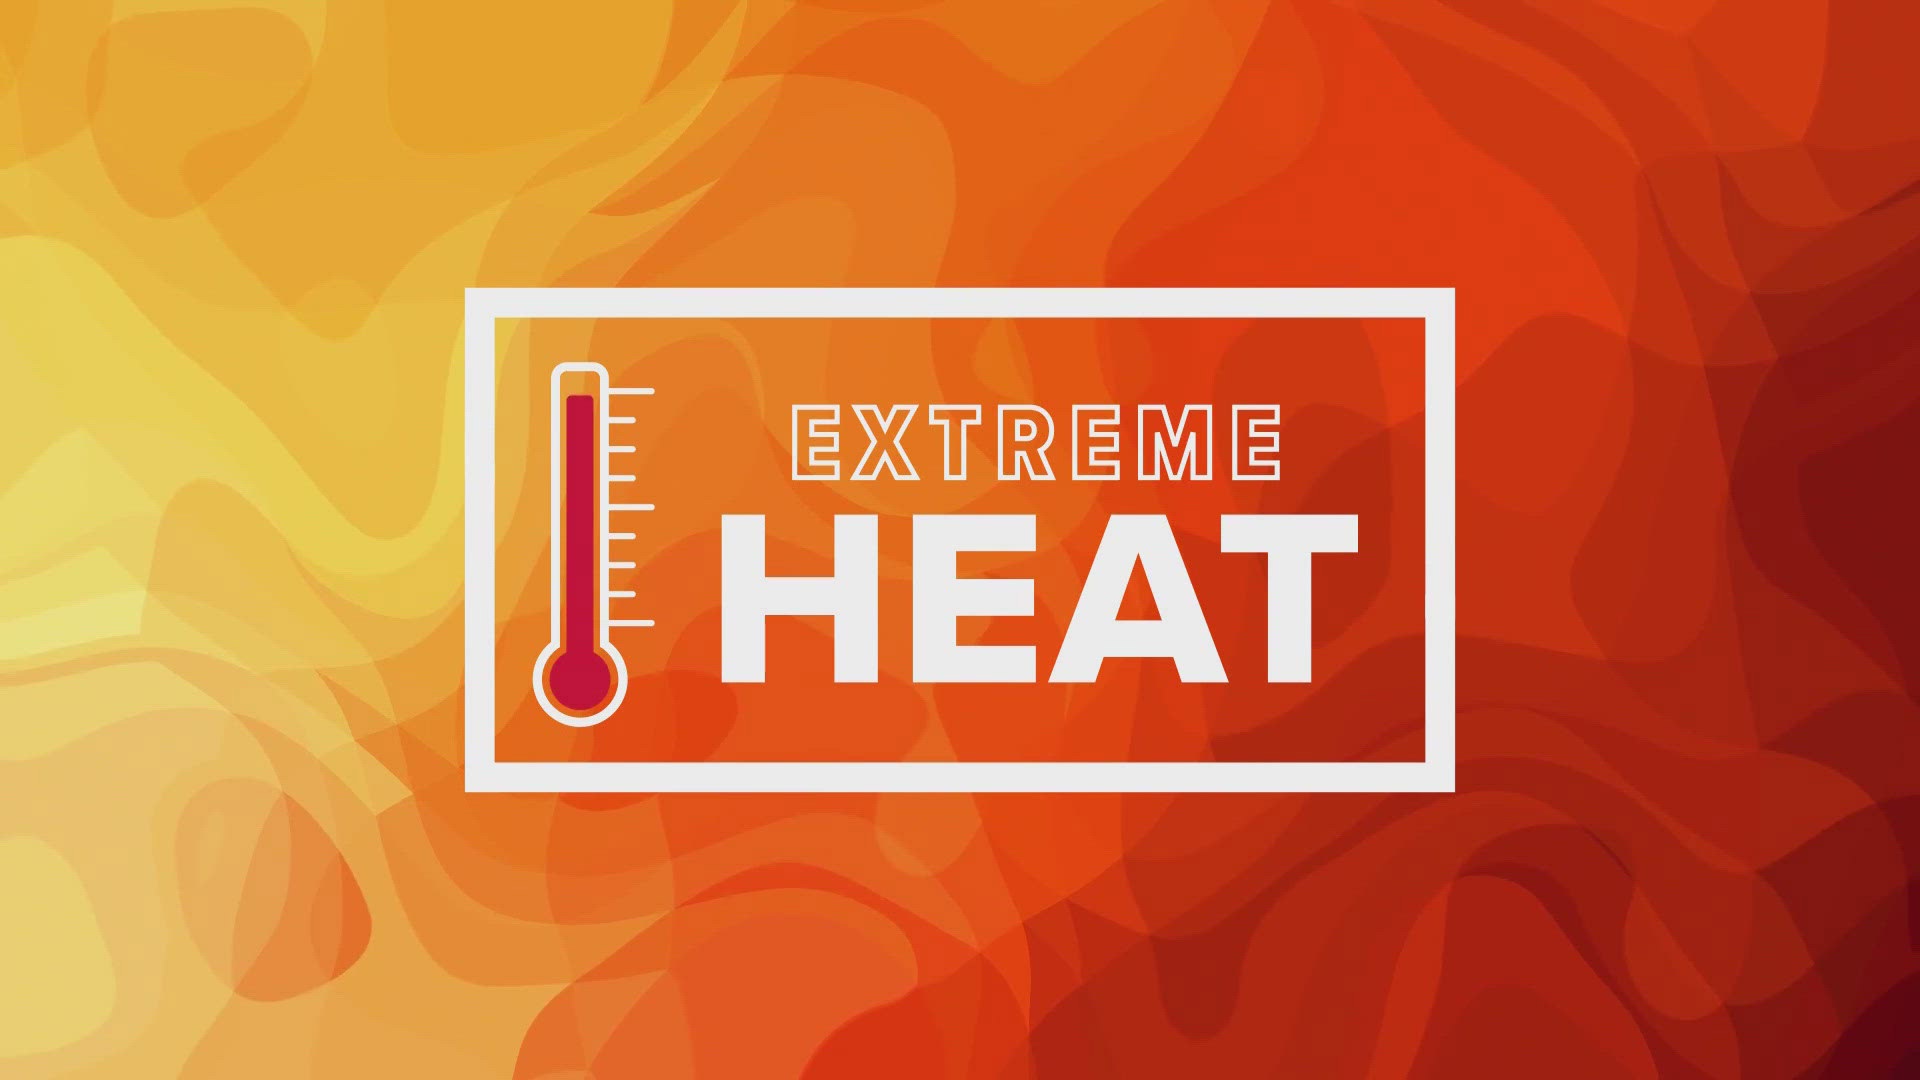 Six people have died in Maryland so far this year from heat-related incidents, according to the latest available data.